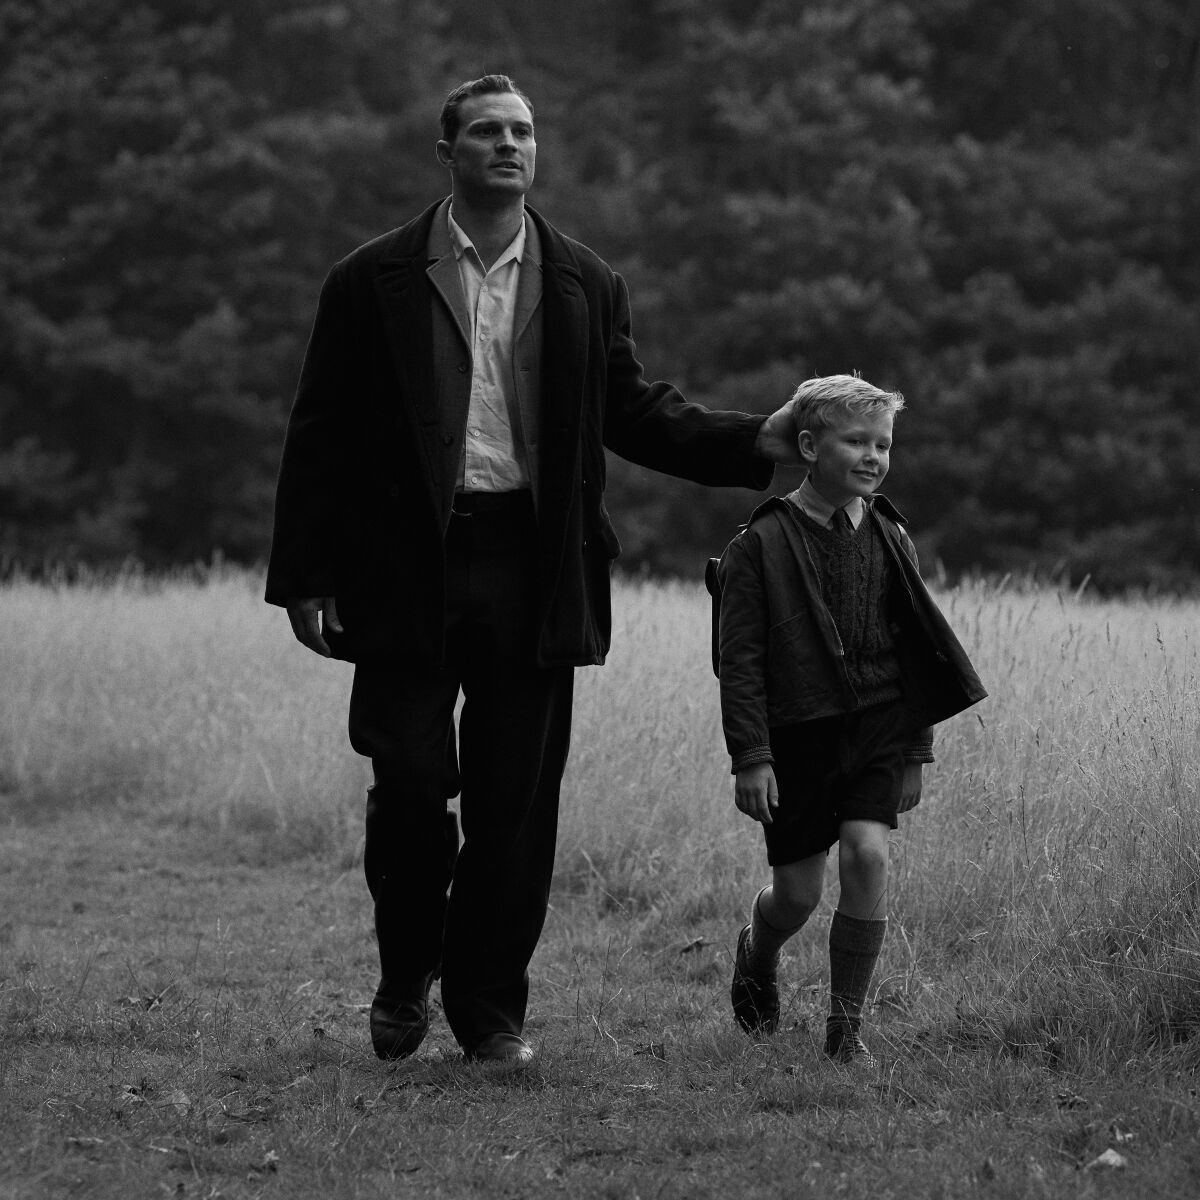 A man and a child go for a walk in the movie "Belfast."